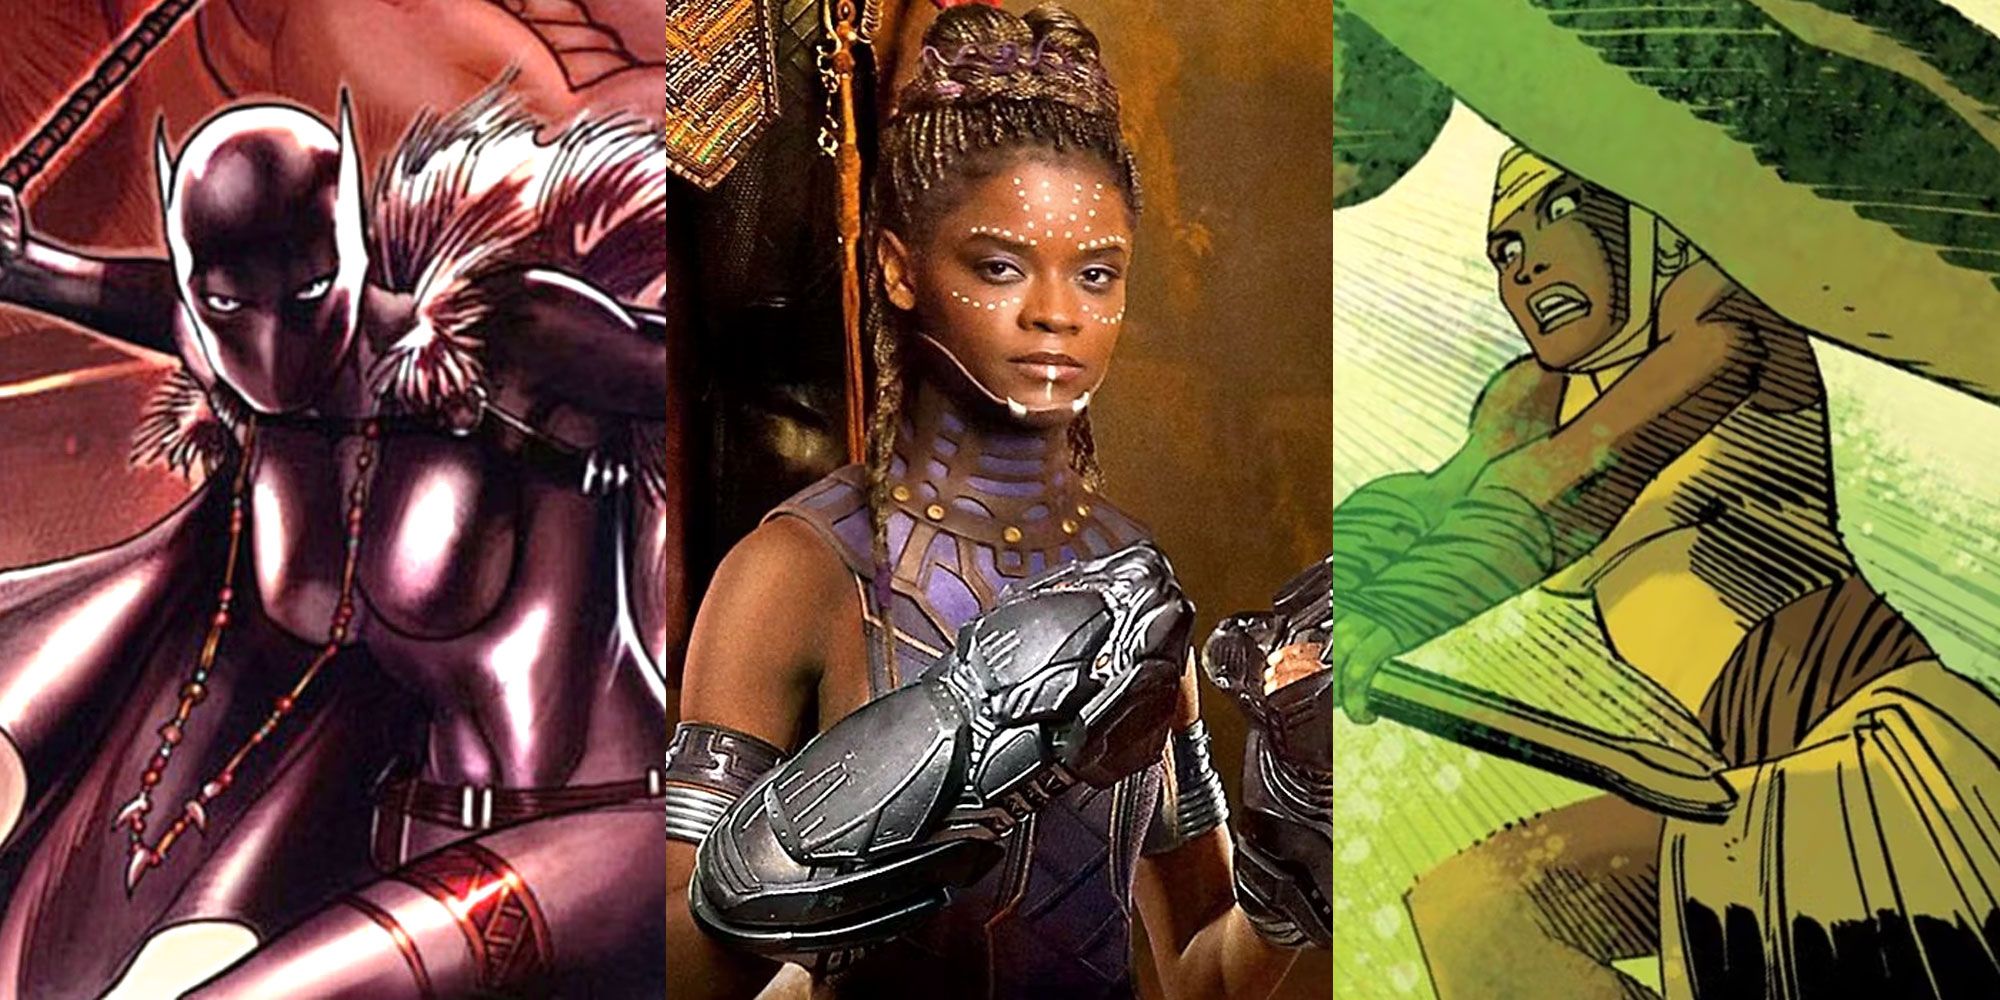 A split image features Shuri as Black Panther in Marvel Comics, Letitia Wright as Shuri in the MCU, and Shuri in action in Marvel Comics